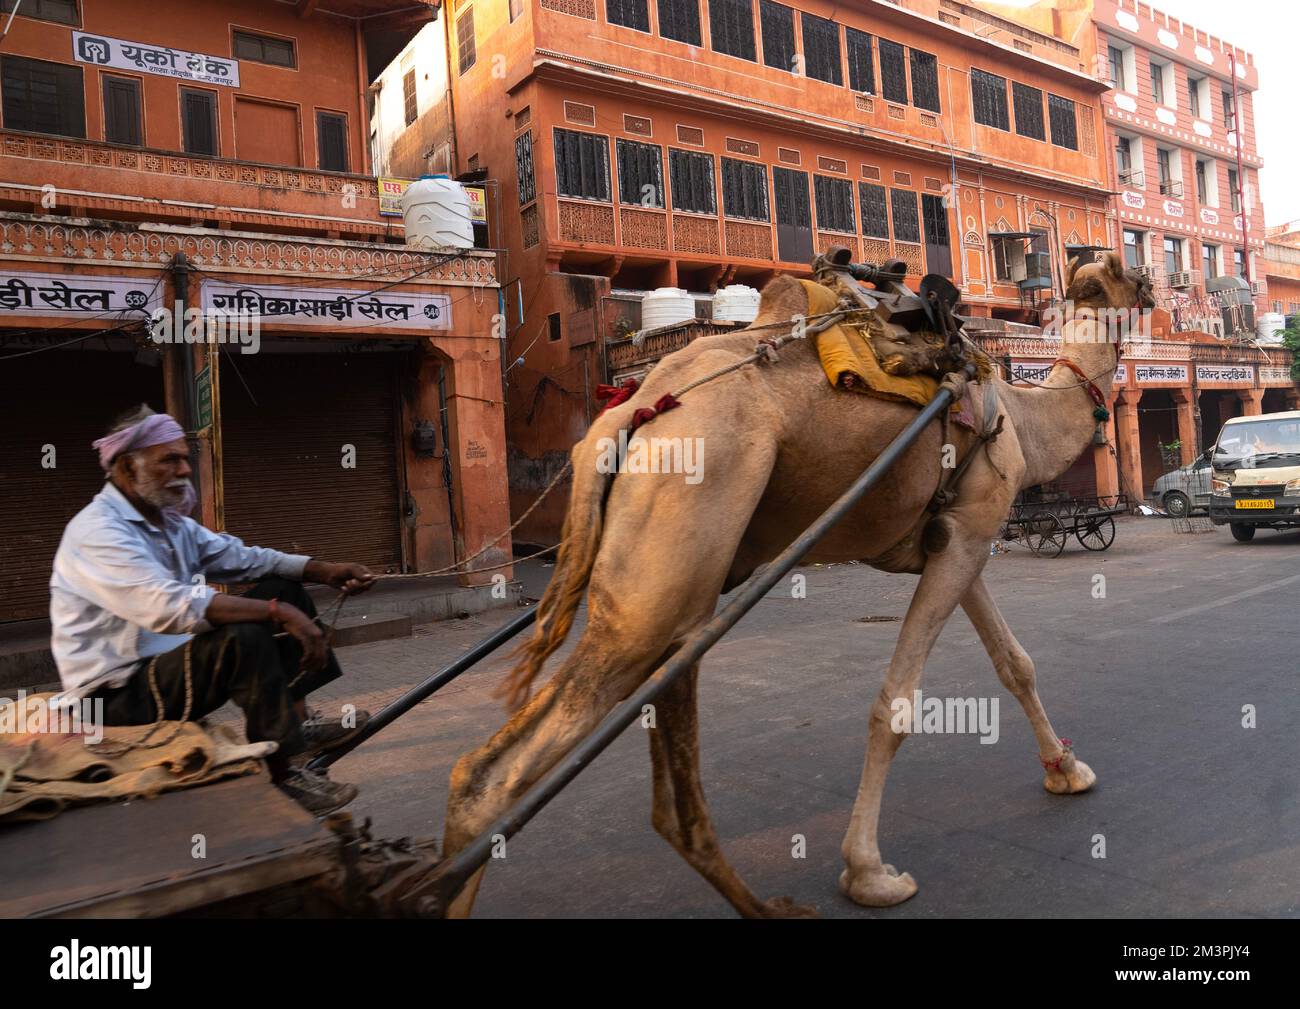 Indian man on a camel cart in the streets, Rajasthan, Jaipur, India Stock Photo